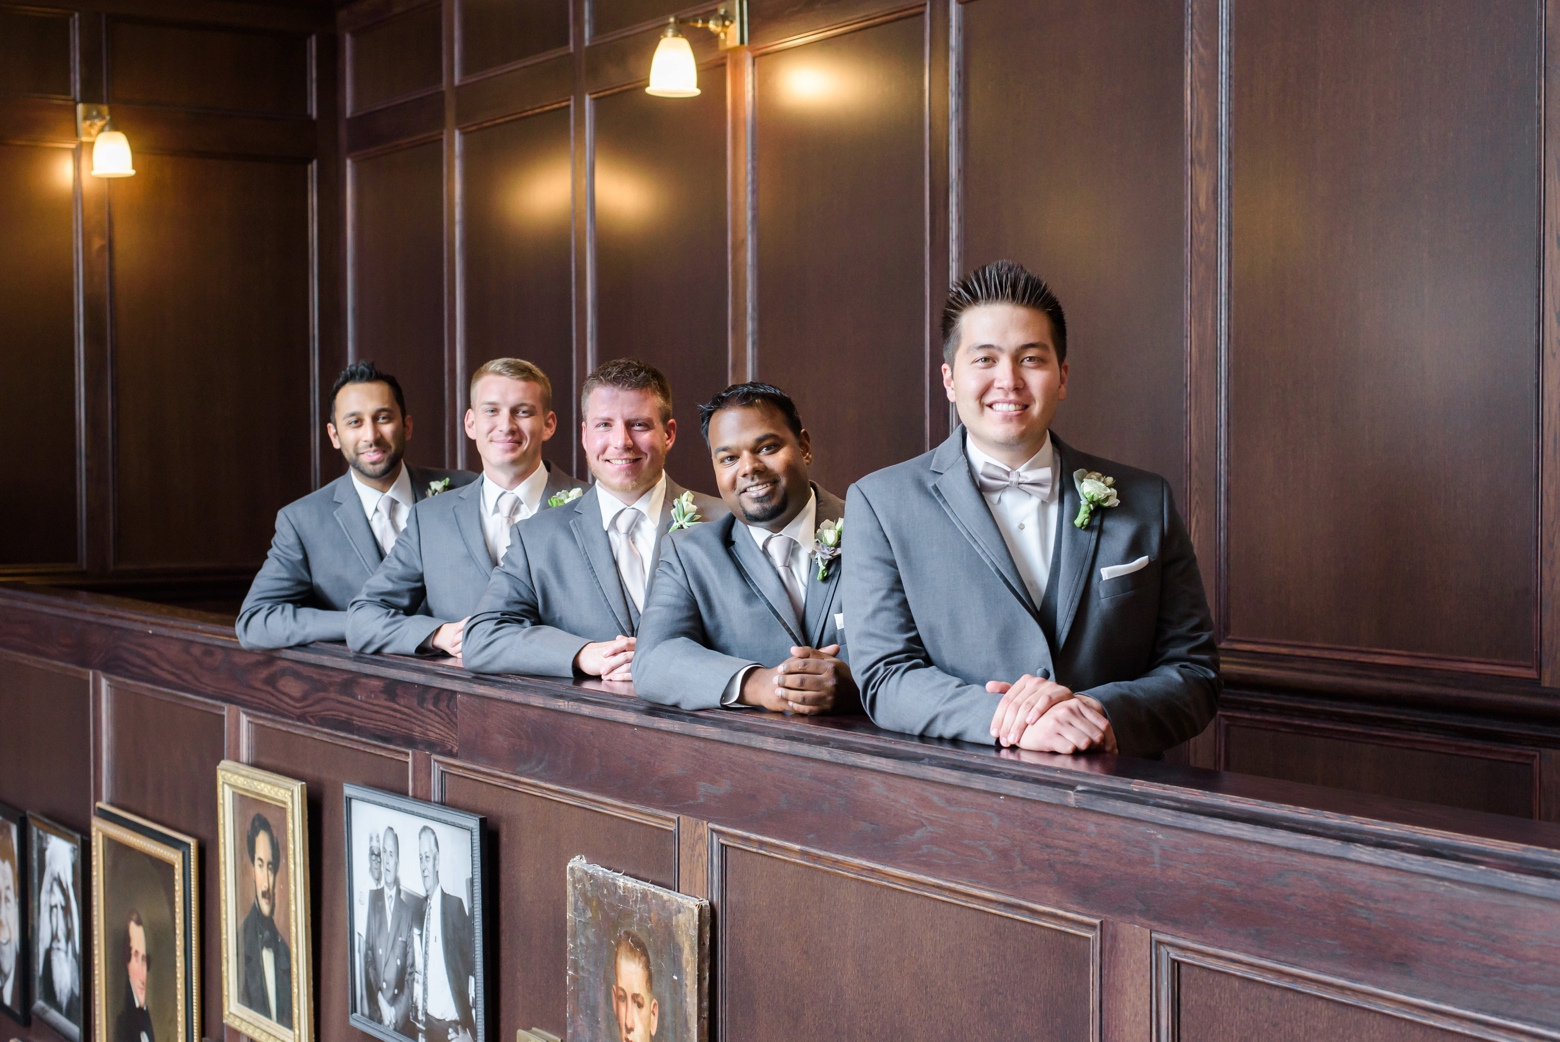 The Groom and Groomsmen pose along a wall in the atrium of Oxford Exchange